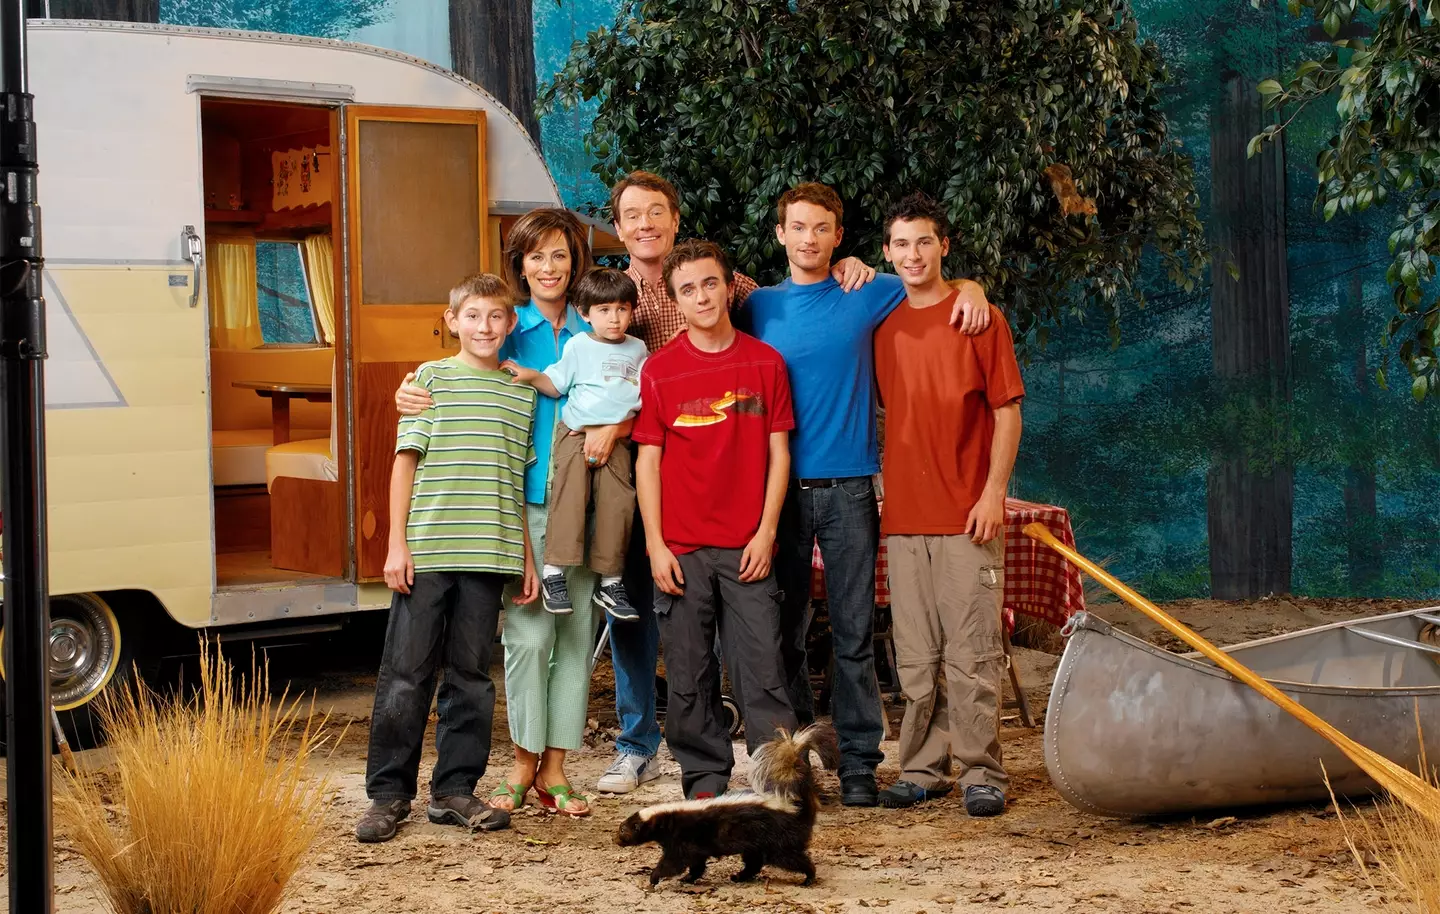 Malcolm in the Middle aired from 2000 to 2006.